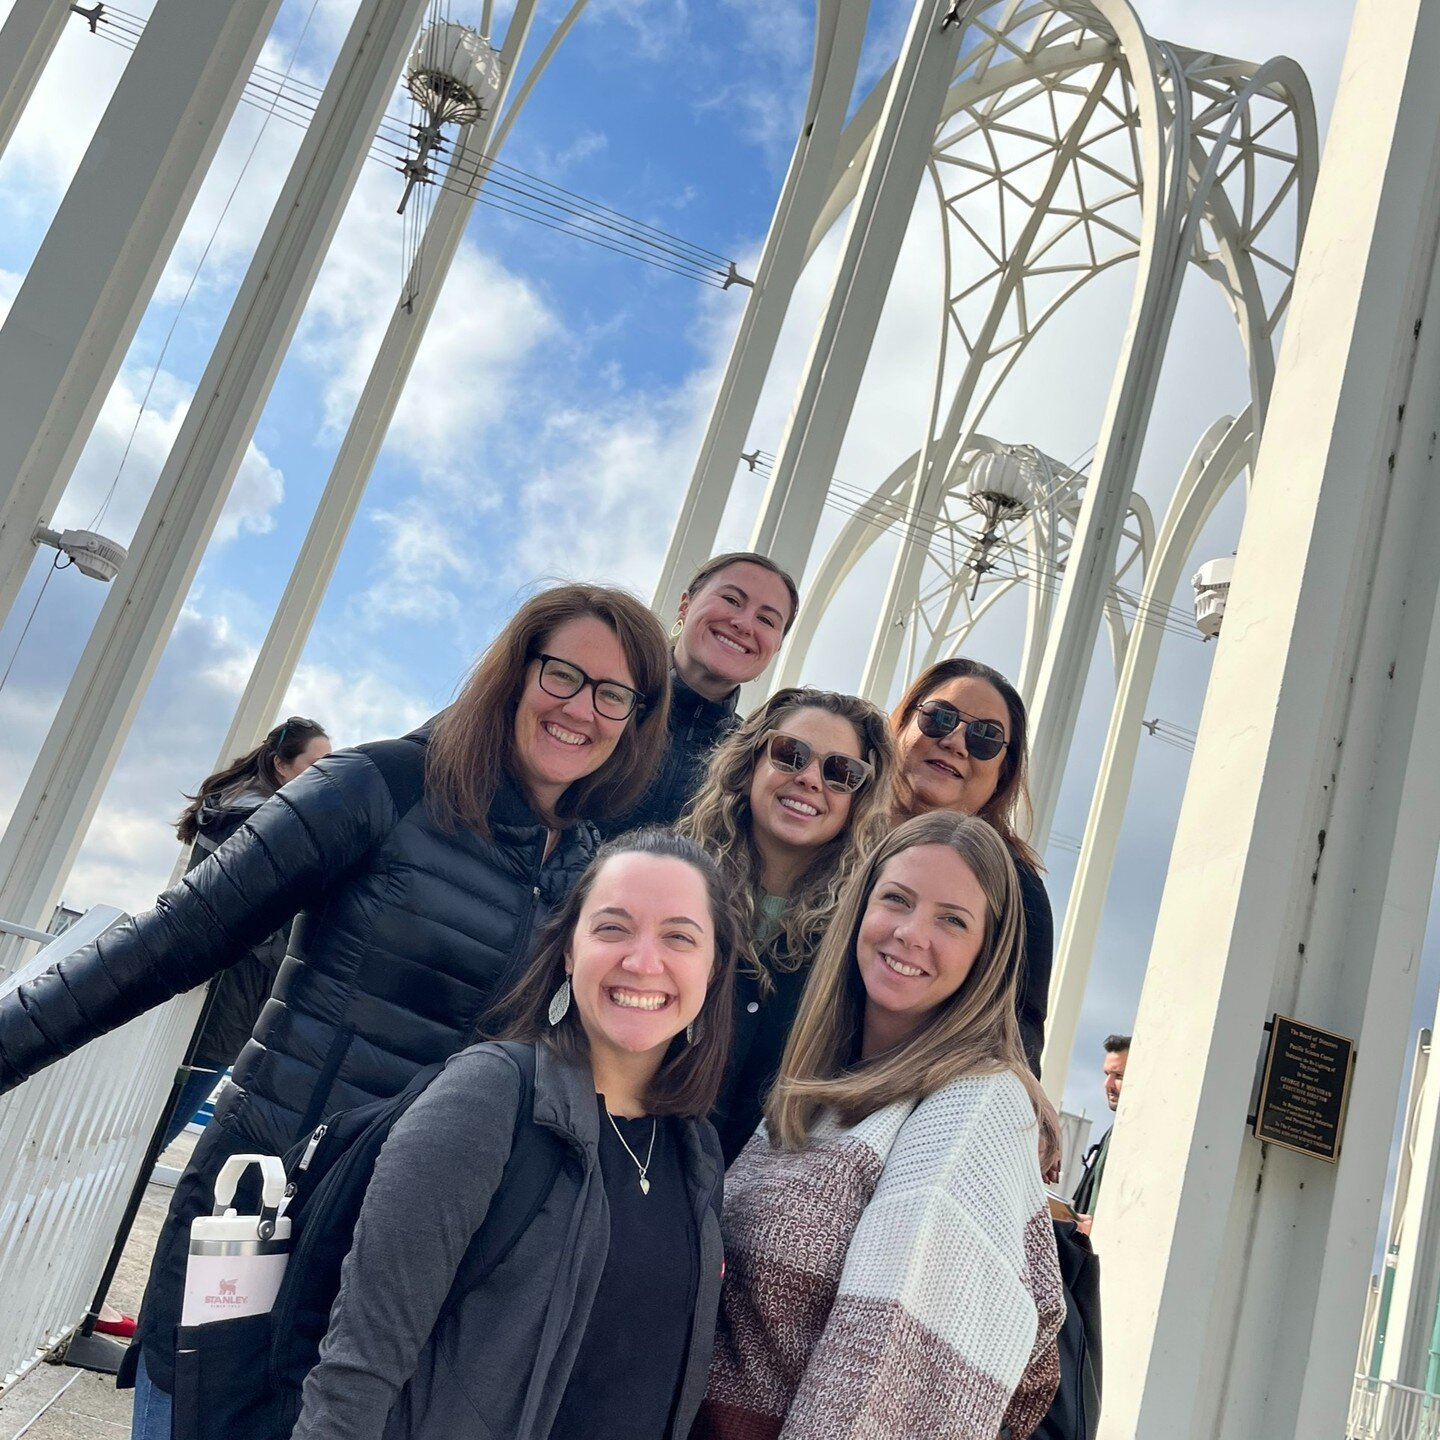 Can you name this iconic #PNW location? We love when the sun comes out while we do walk-throughs and site visits to put the final touches together before attendees arrive! 🌤️ #eventprofs